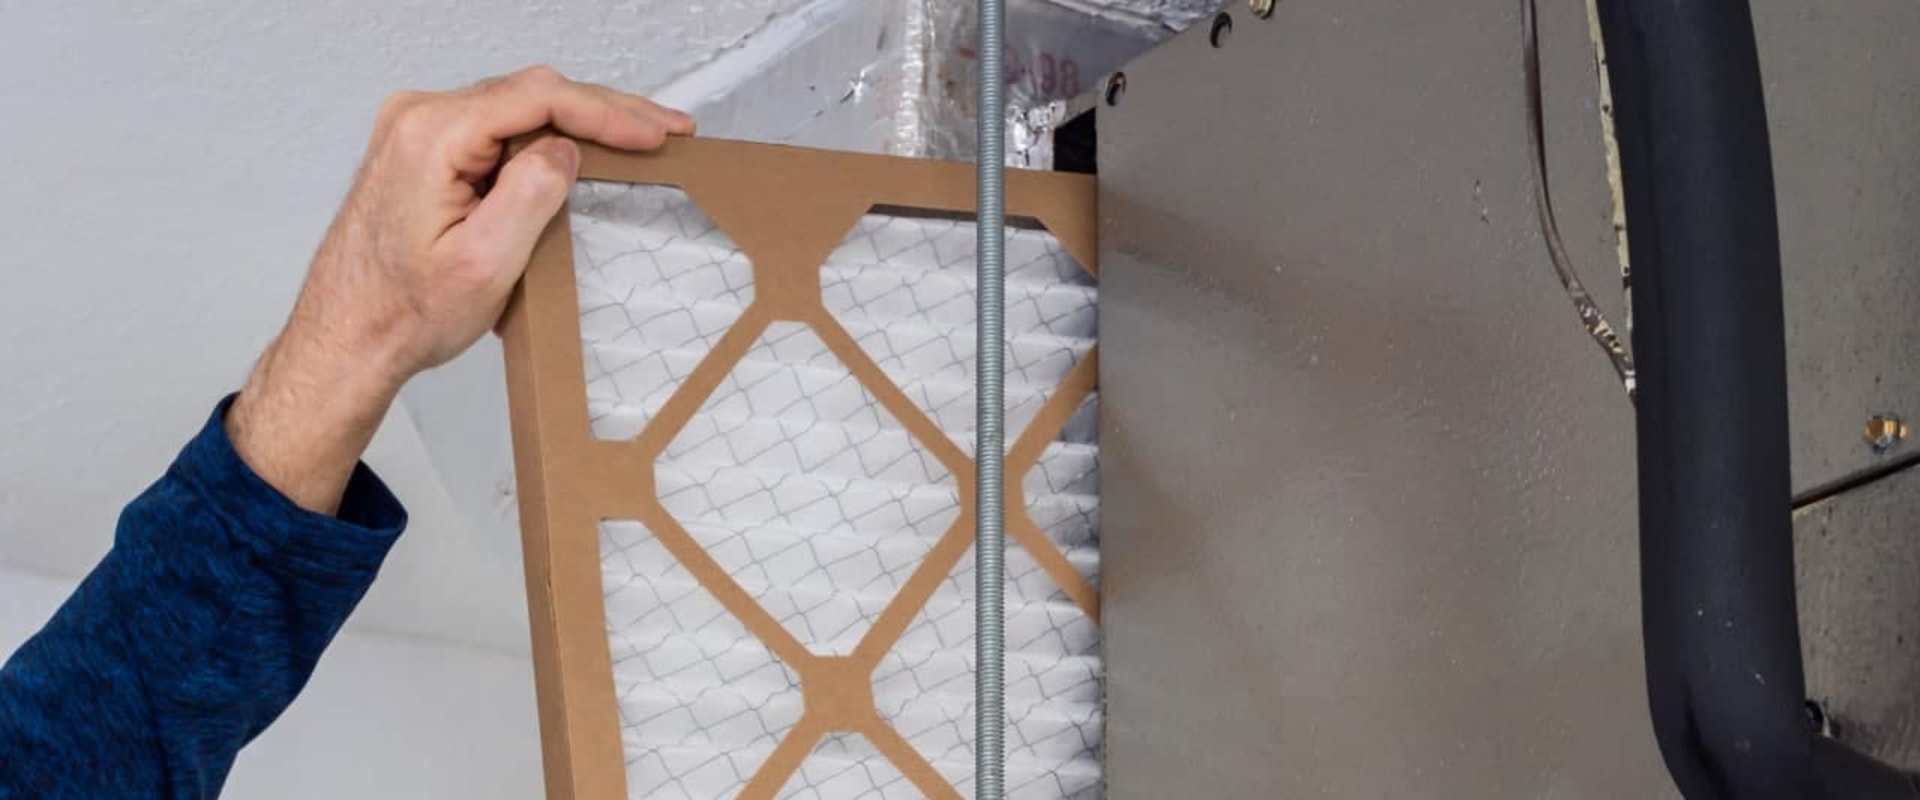 How Long Do Permanent Furnace Filters Last?